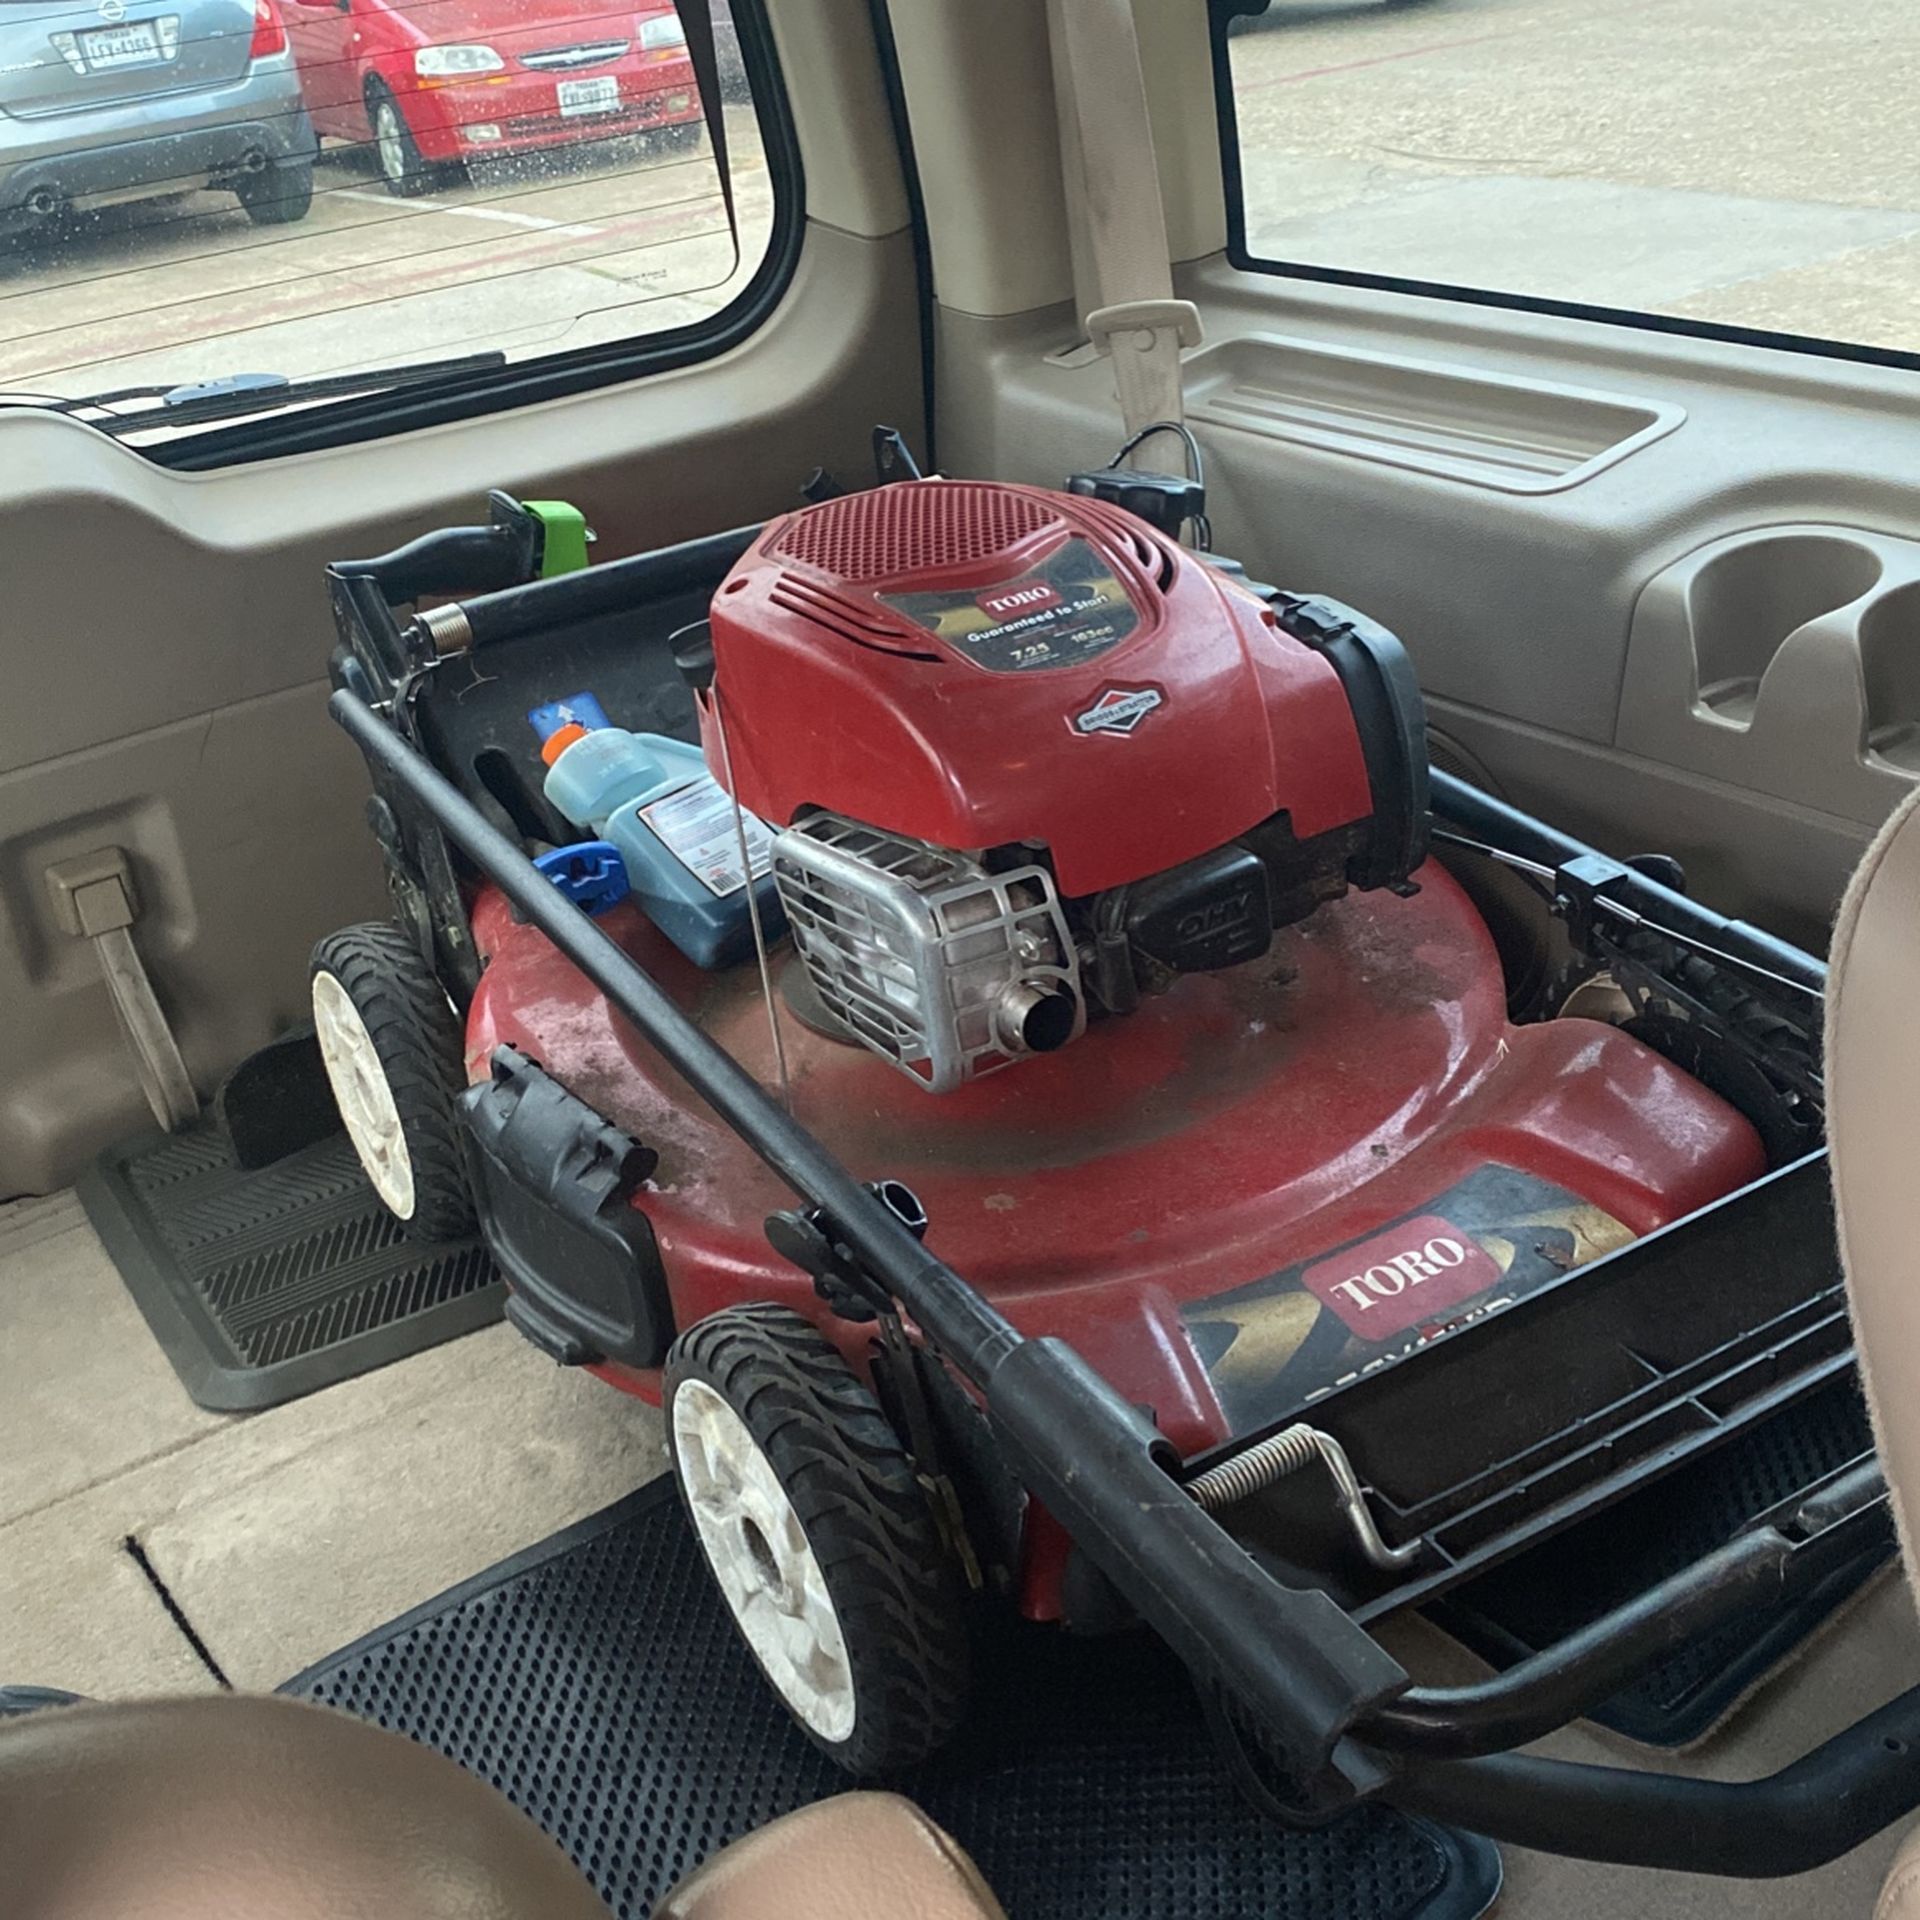 Toro Lawn Mower And Echo Weed Eater